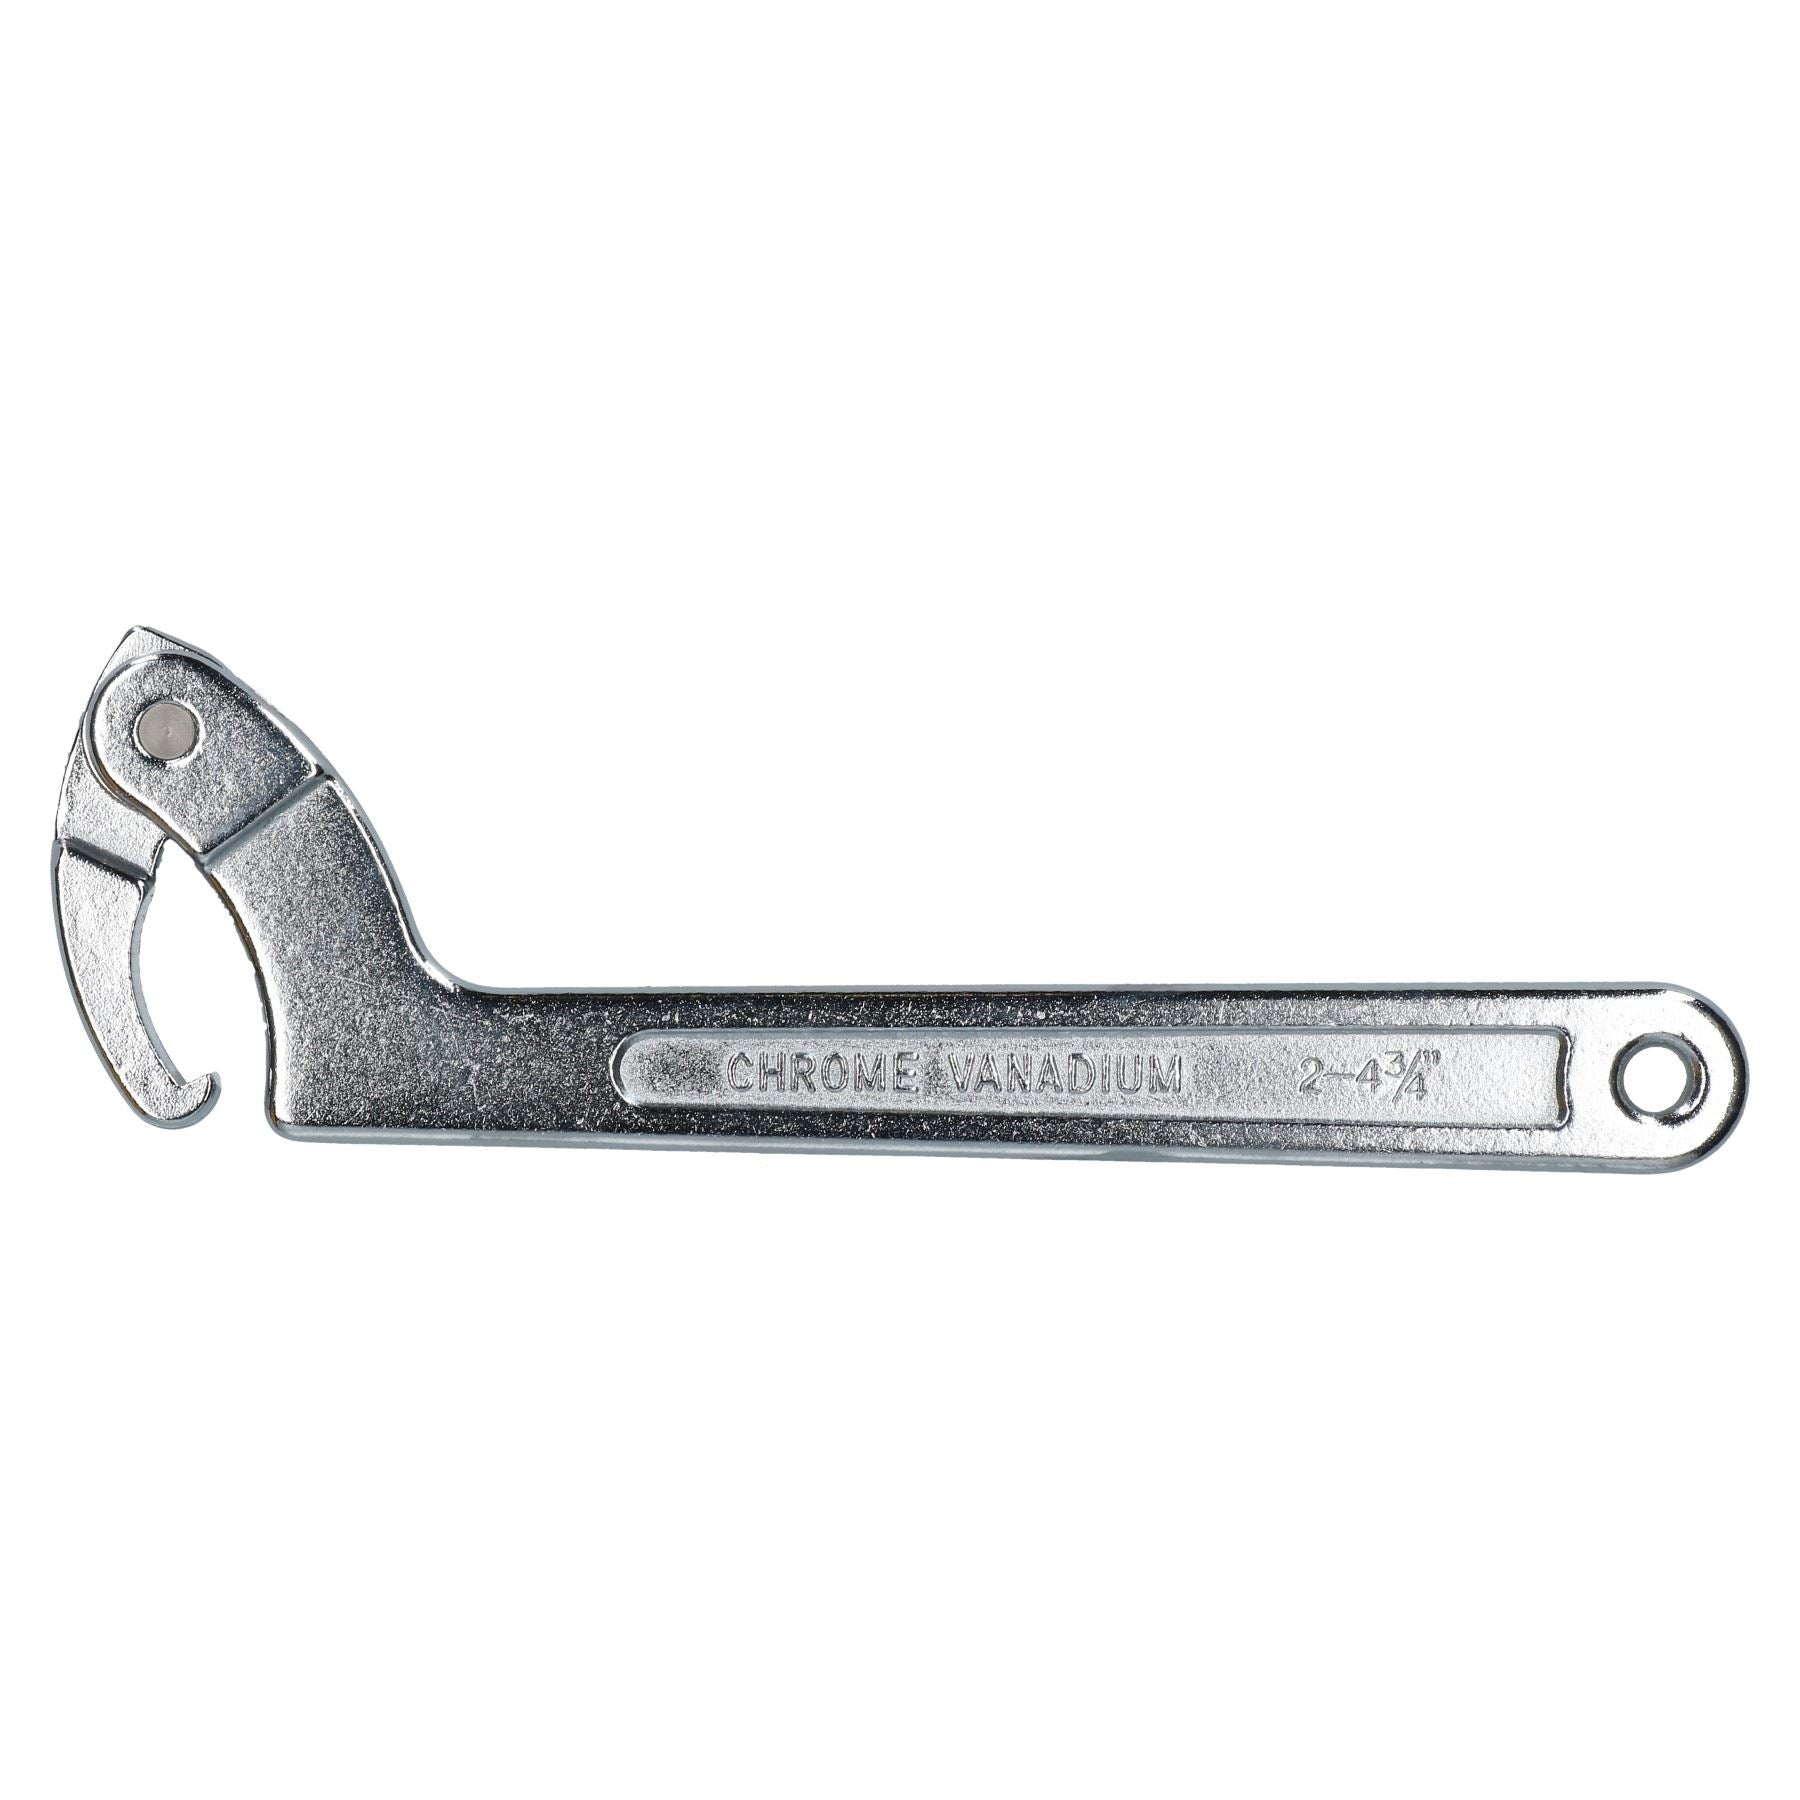 Adjustable Hook Wrench C Spanner 50mm - 120mm For Slotted Retaining Rings